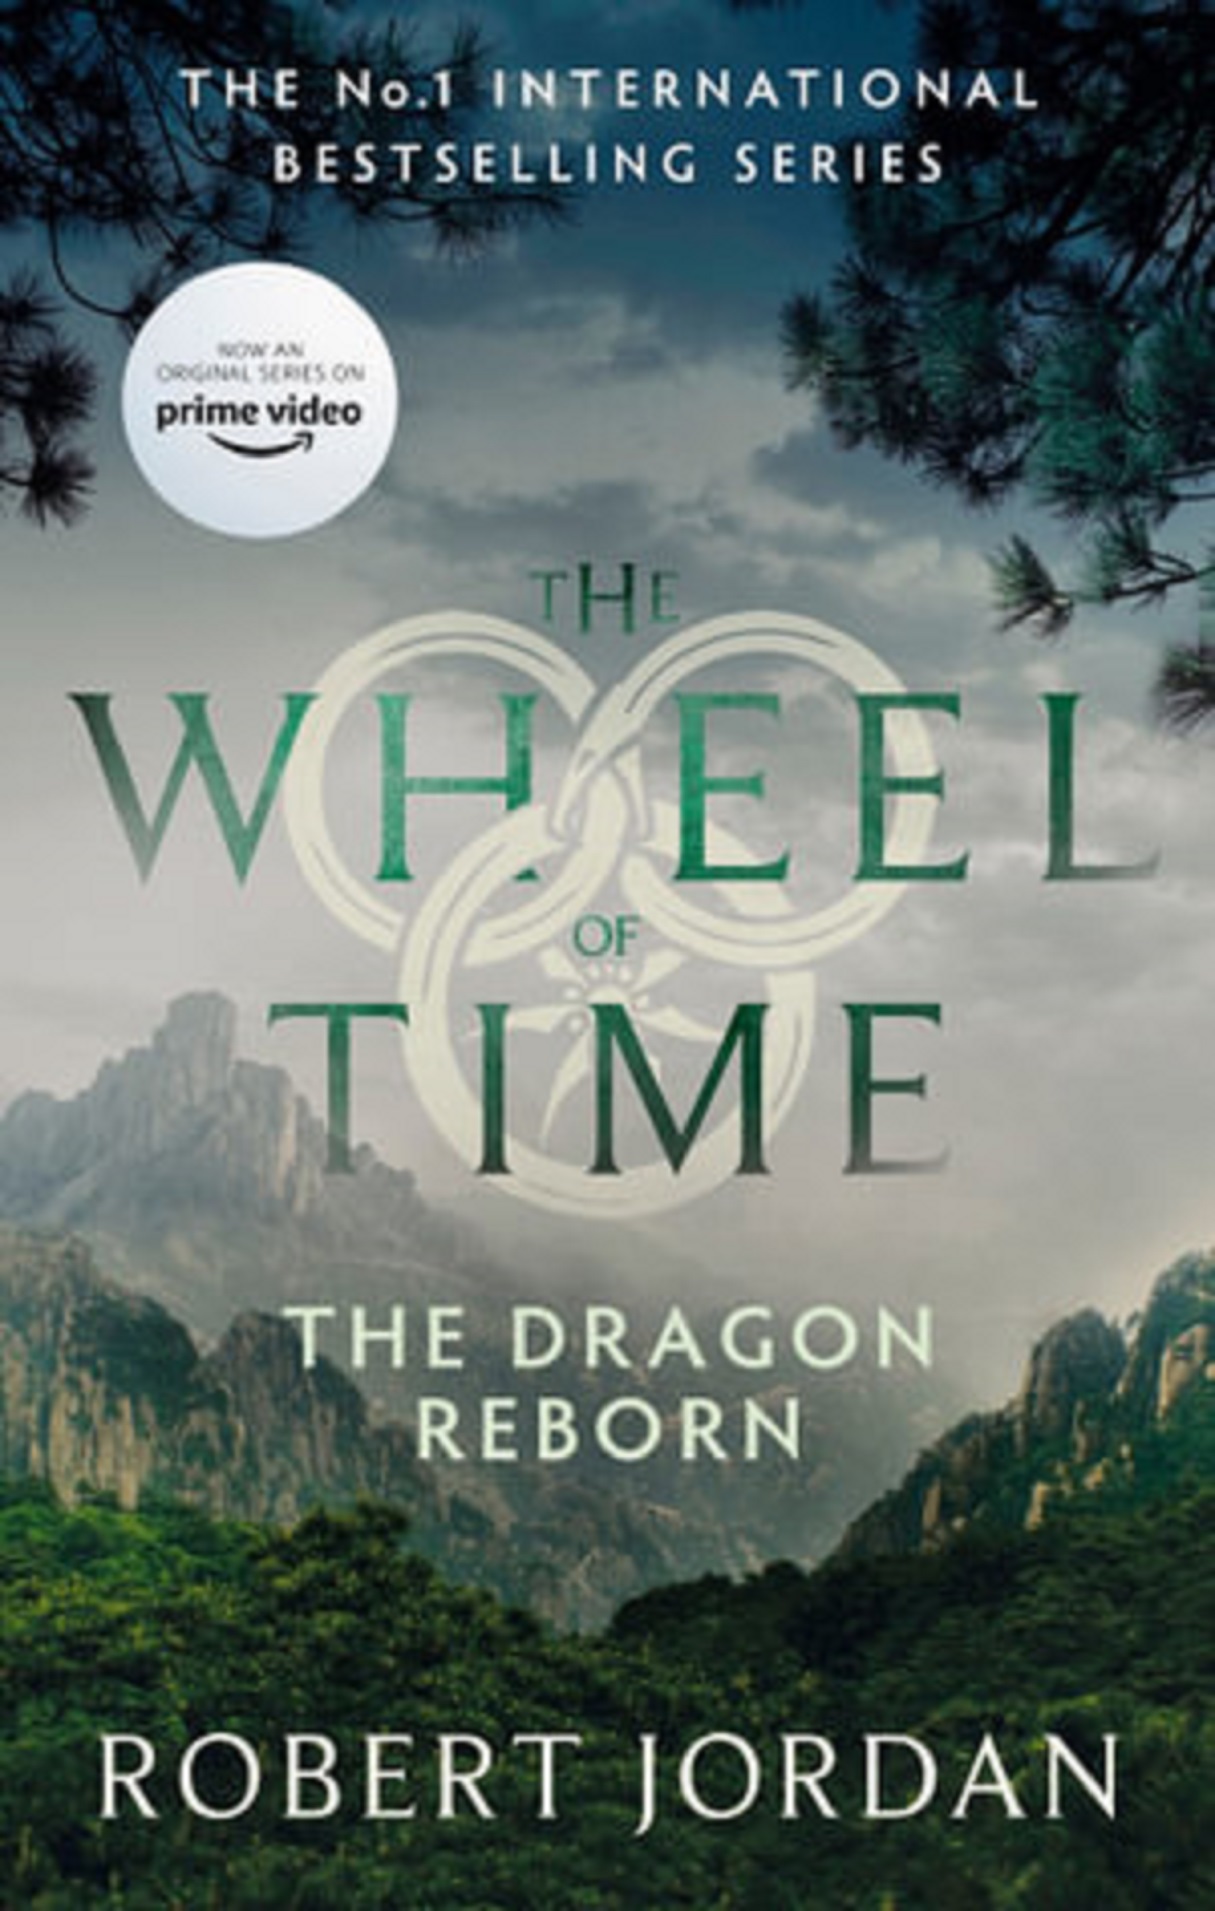 The Dragon Reborn - The Wheel of Time, Book 3